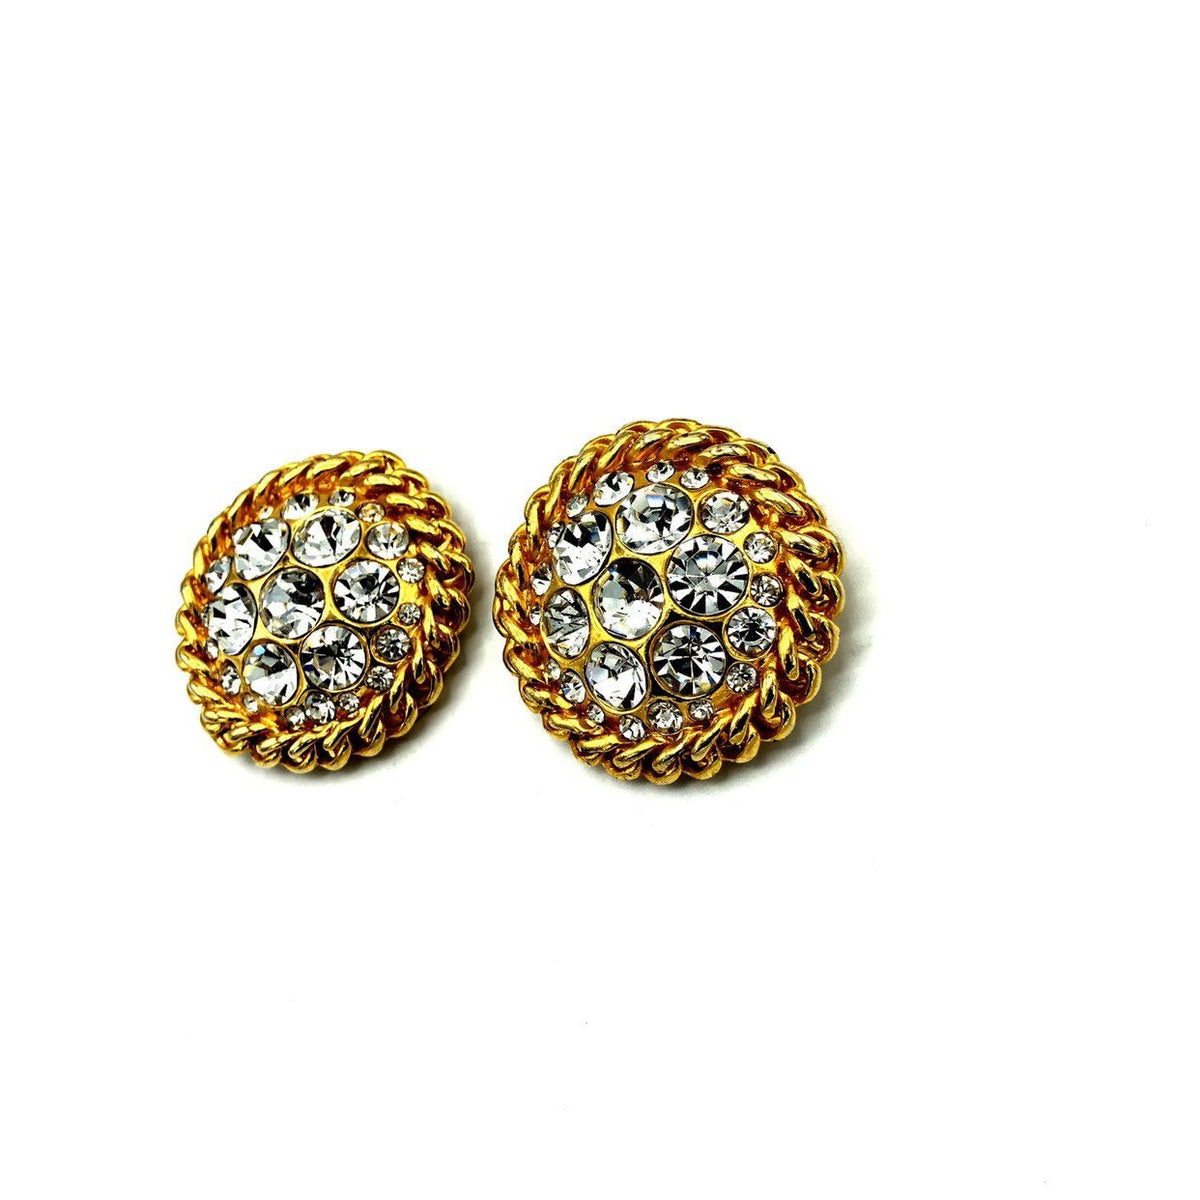 Blanca Gold Round Rhinestone Vintage Statement Clip-On Earrings - 24 Wishes Vintage Jewelry